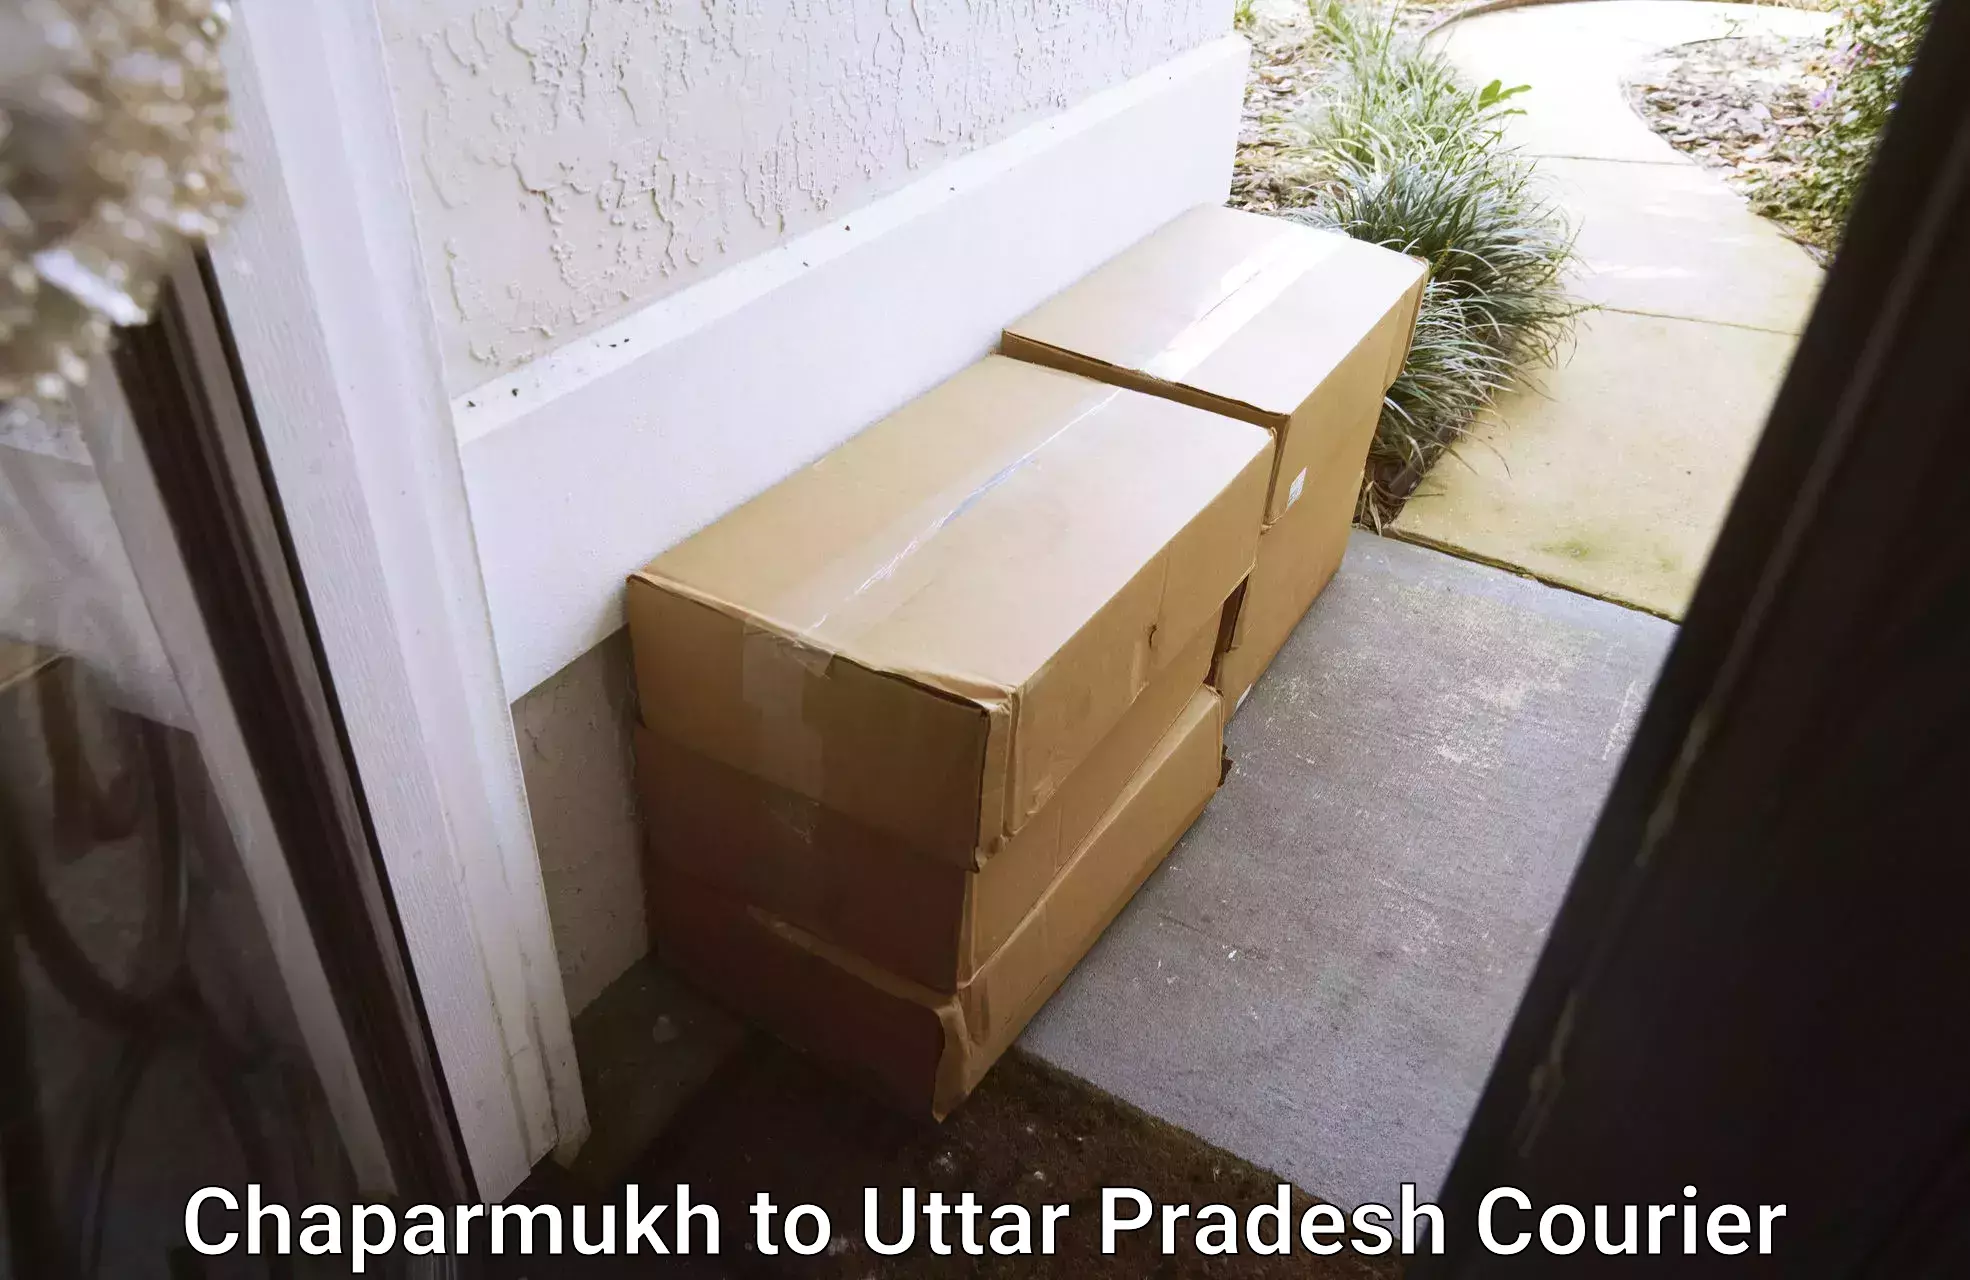 Emergency parcel delivery in Chaparmukh to Ghaziabad